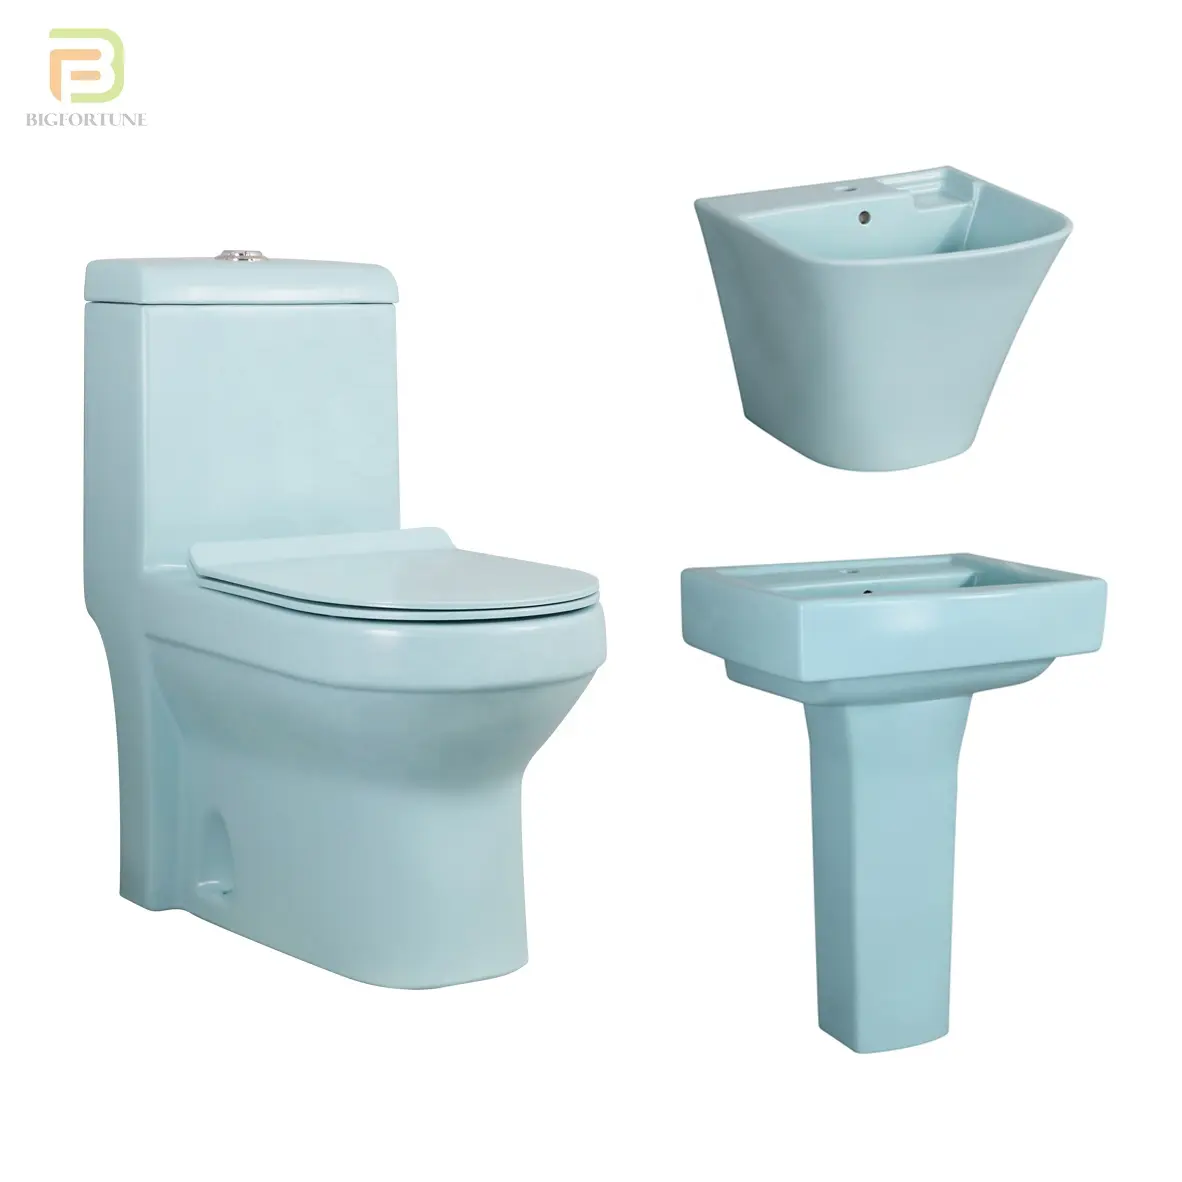 Chinese modern style sanitary ware blue toilets pedestal basin wall hung sink ceramic wc toilet set